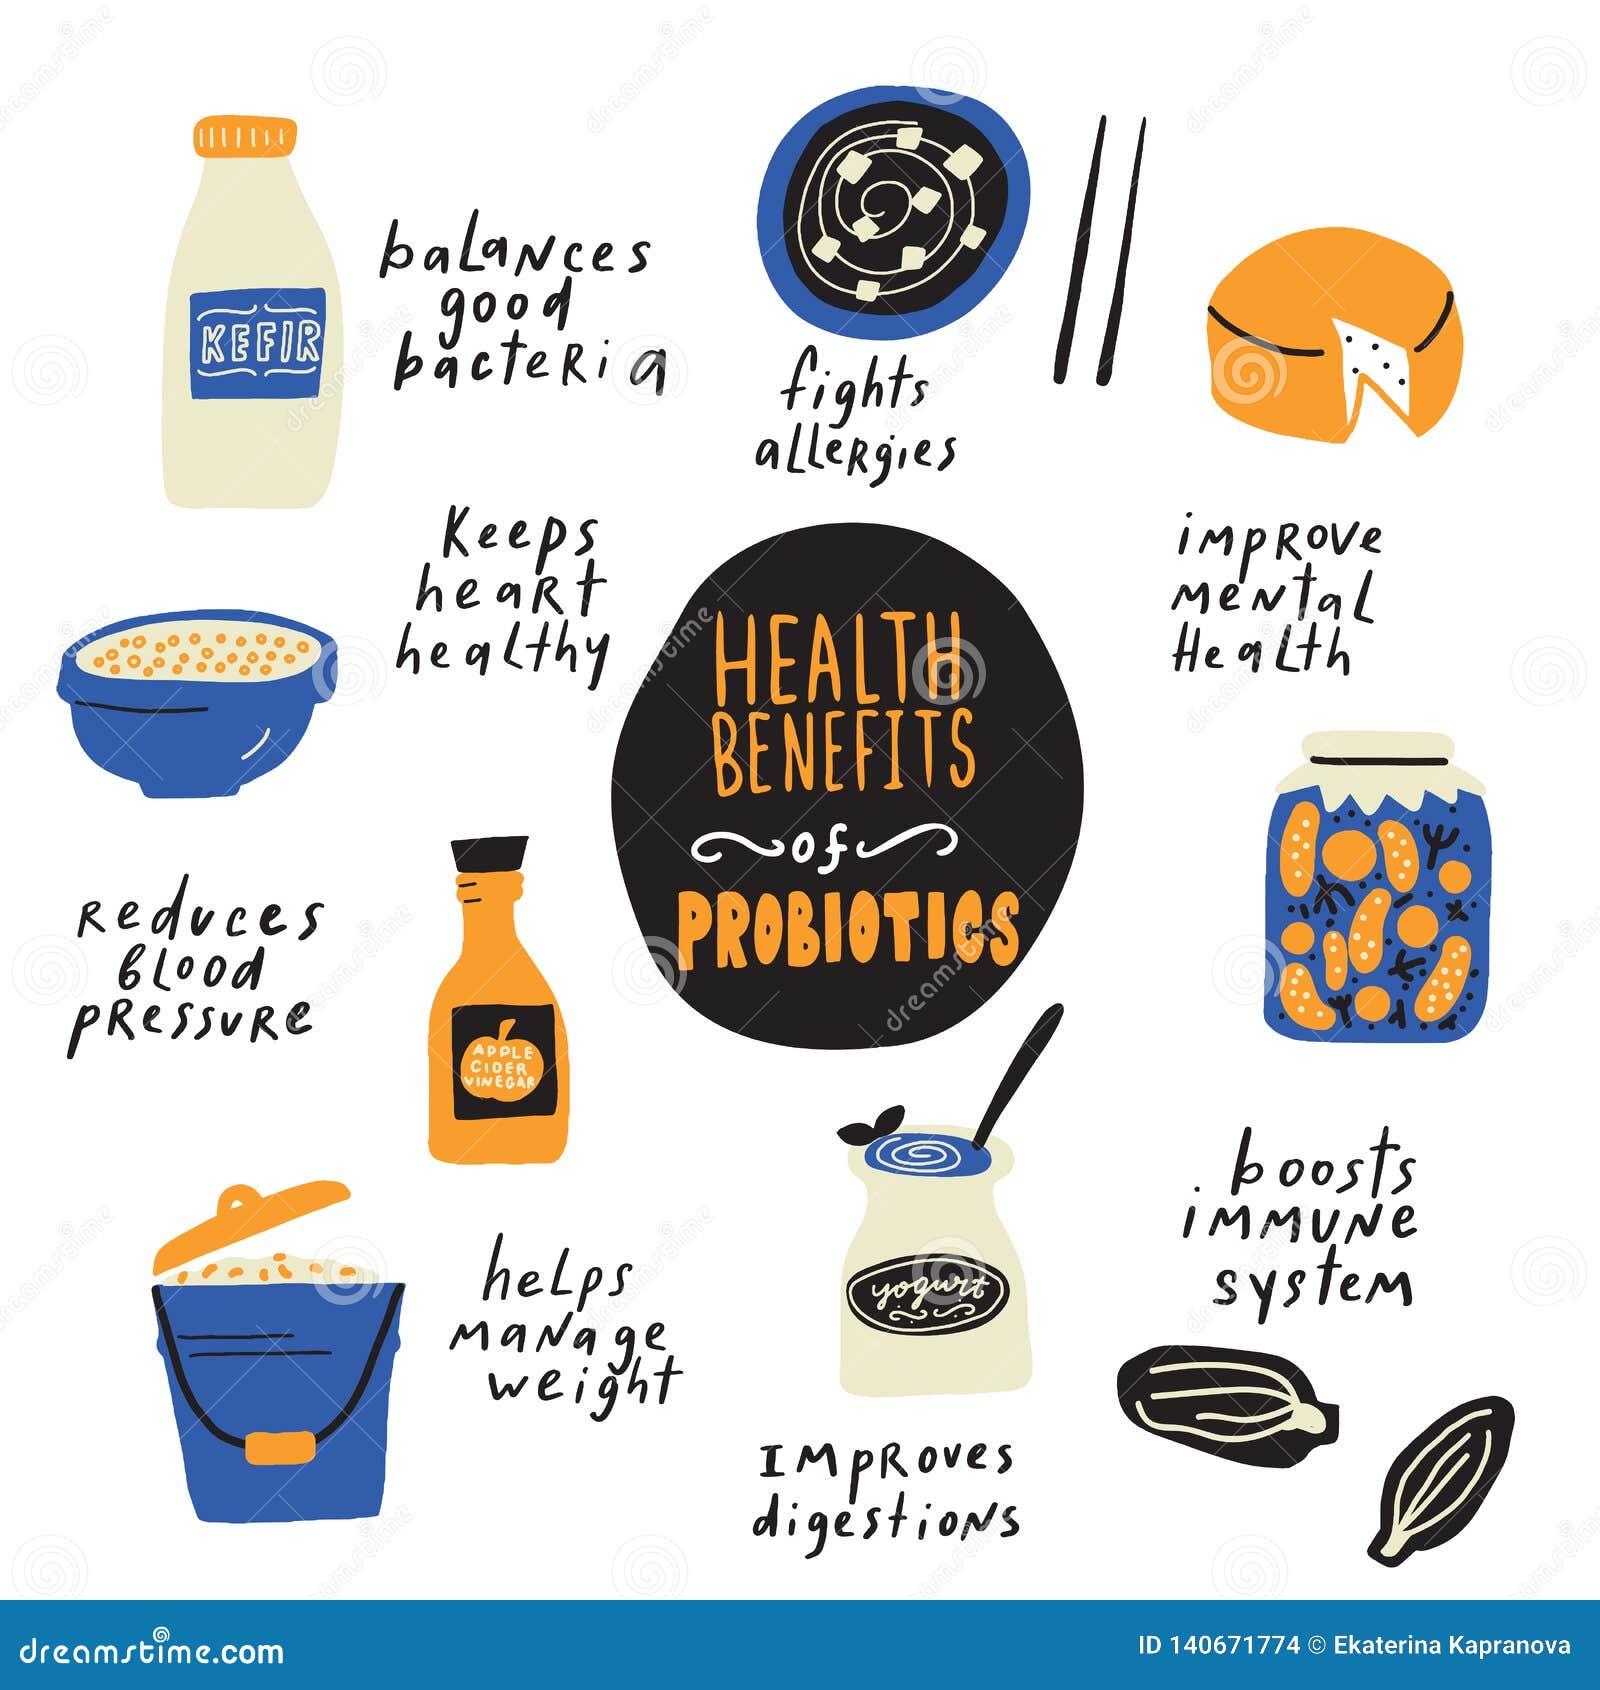 health benefits of probiotics. hand drawn infographic poster with probiotic foods and its benefits. made in .